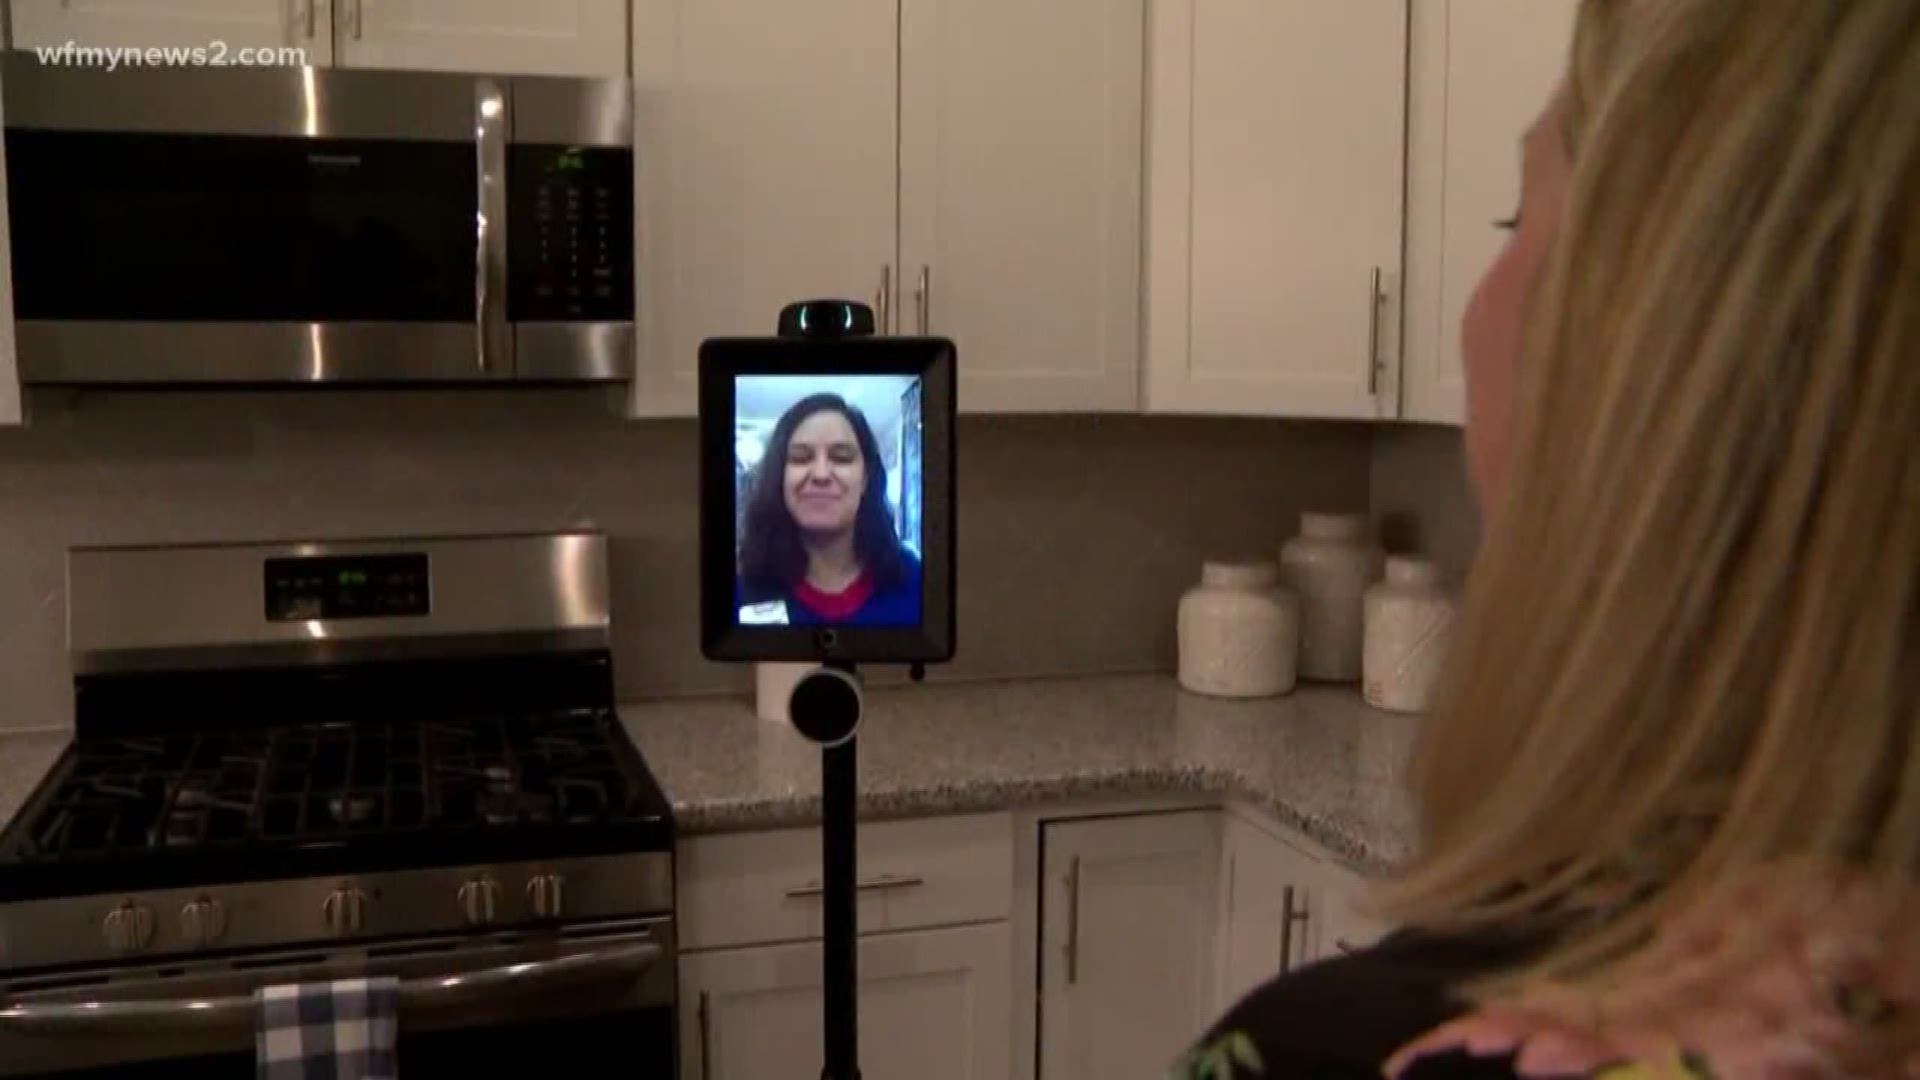 The new tech allowed real estate agents to give tours through a mobile iPad, meaning tours can be given almost 24/7.